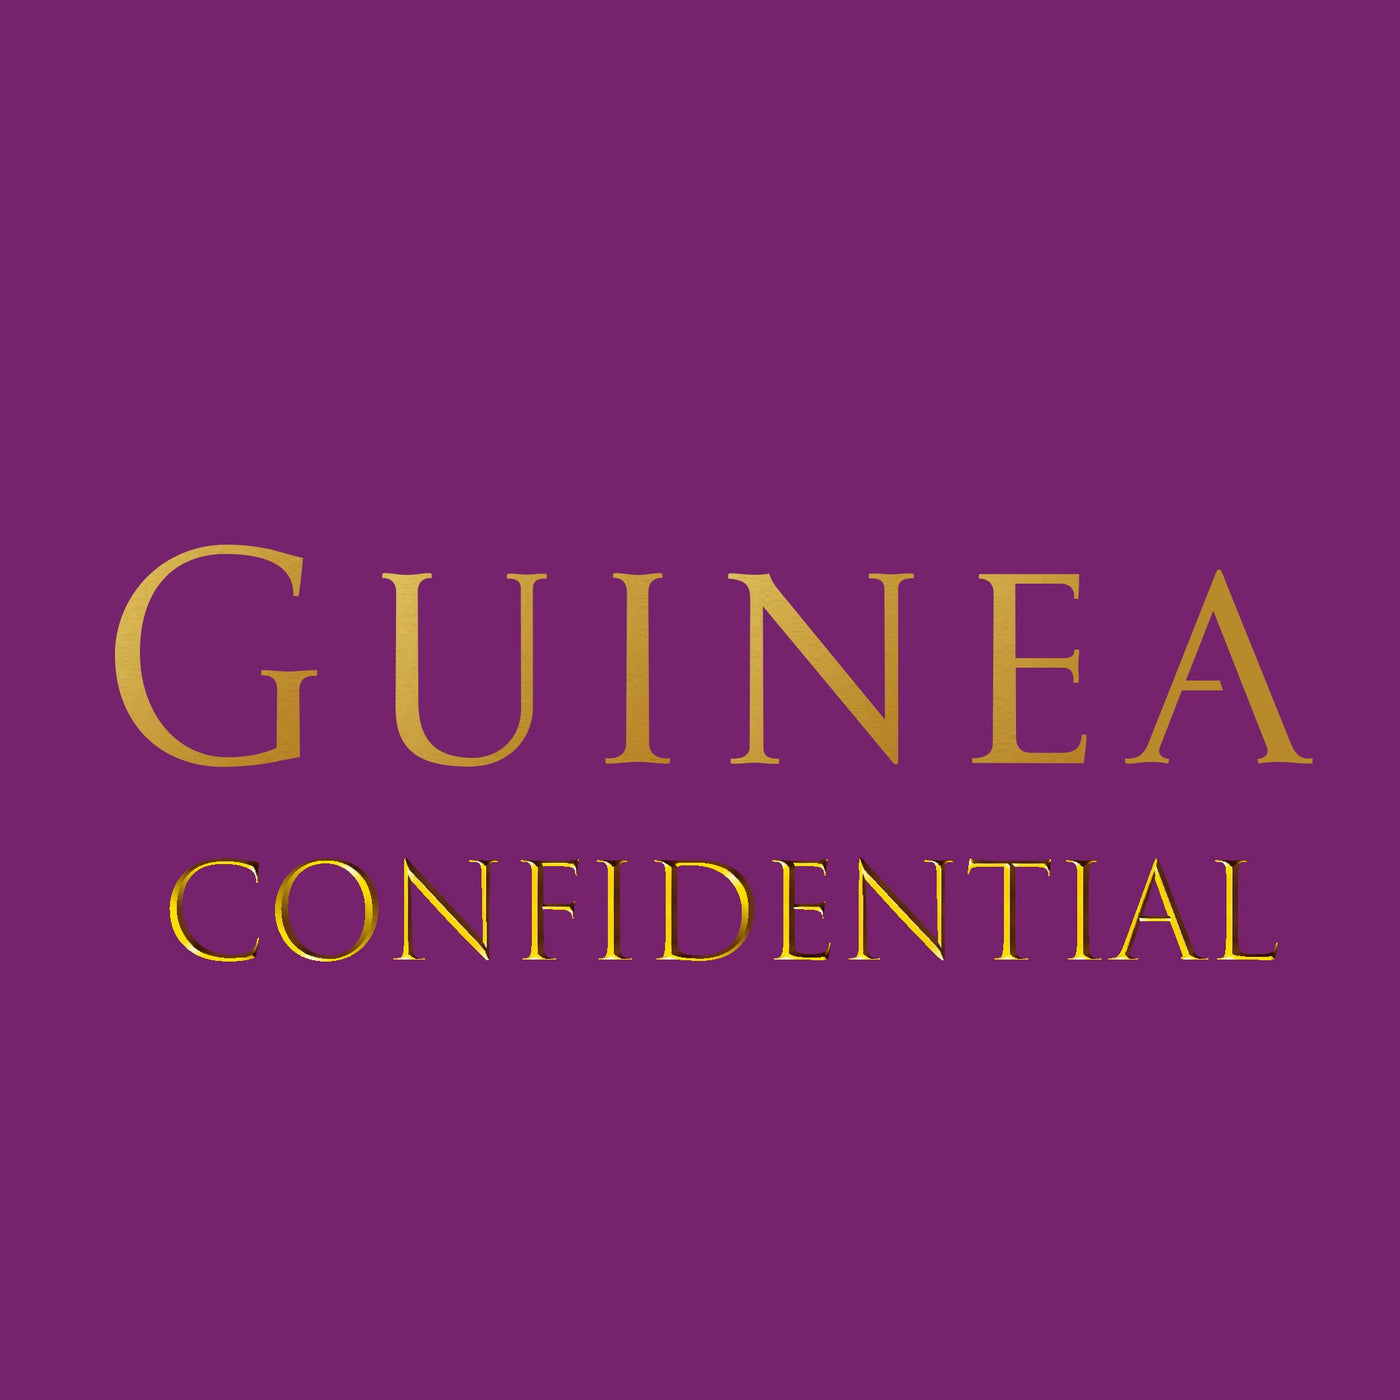 Gold Guinea Confidential lettering on purple background